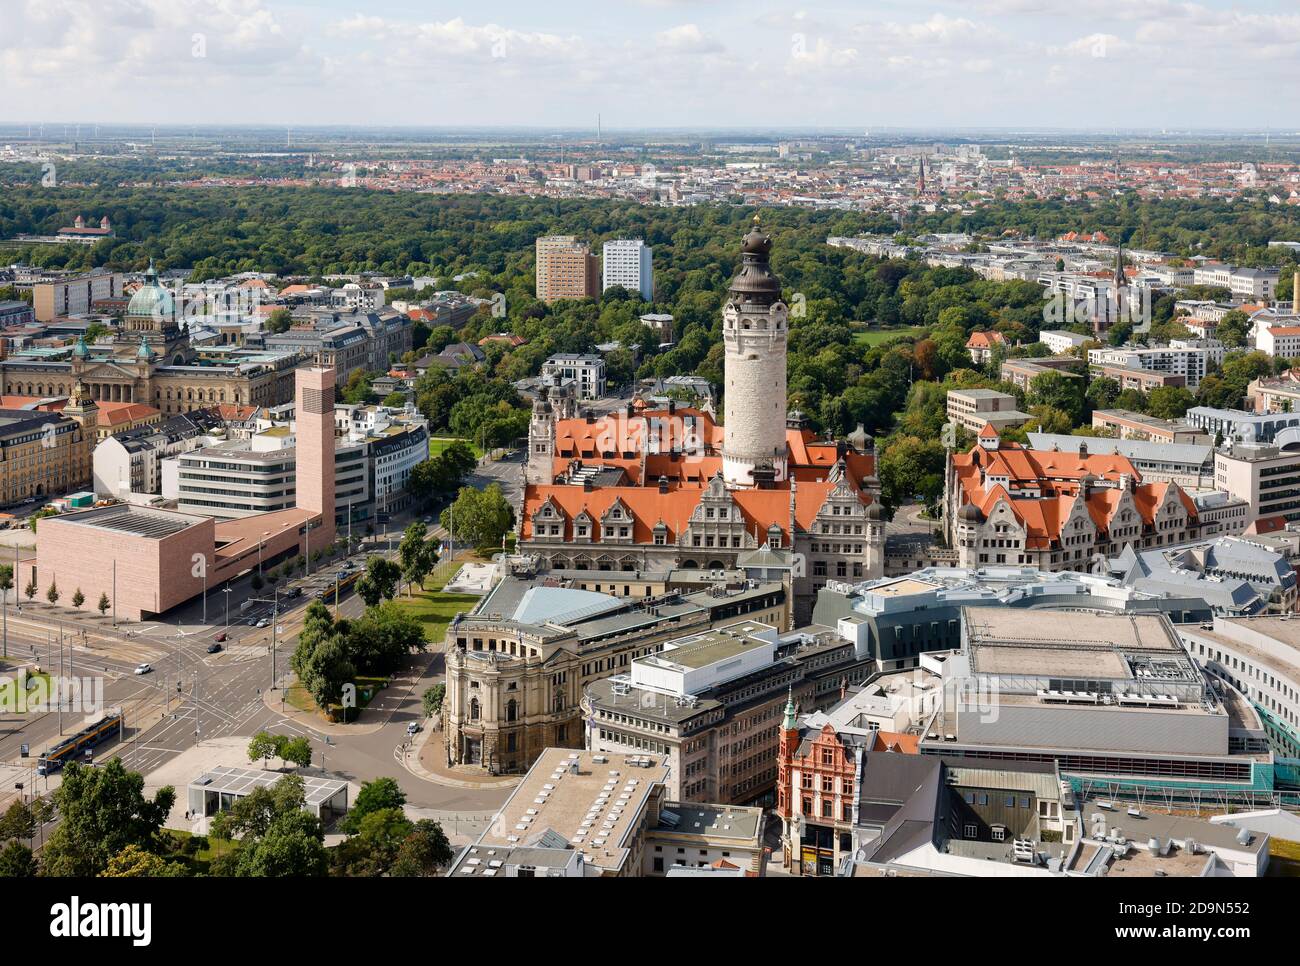 Leipzig, Saxony, Germany, Stadtuebersicht, old town, on the left Catholic Propstei St. Trinitatis, center of the picture new town hall, in the back Johannapark. Stock Photo